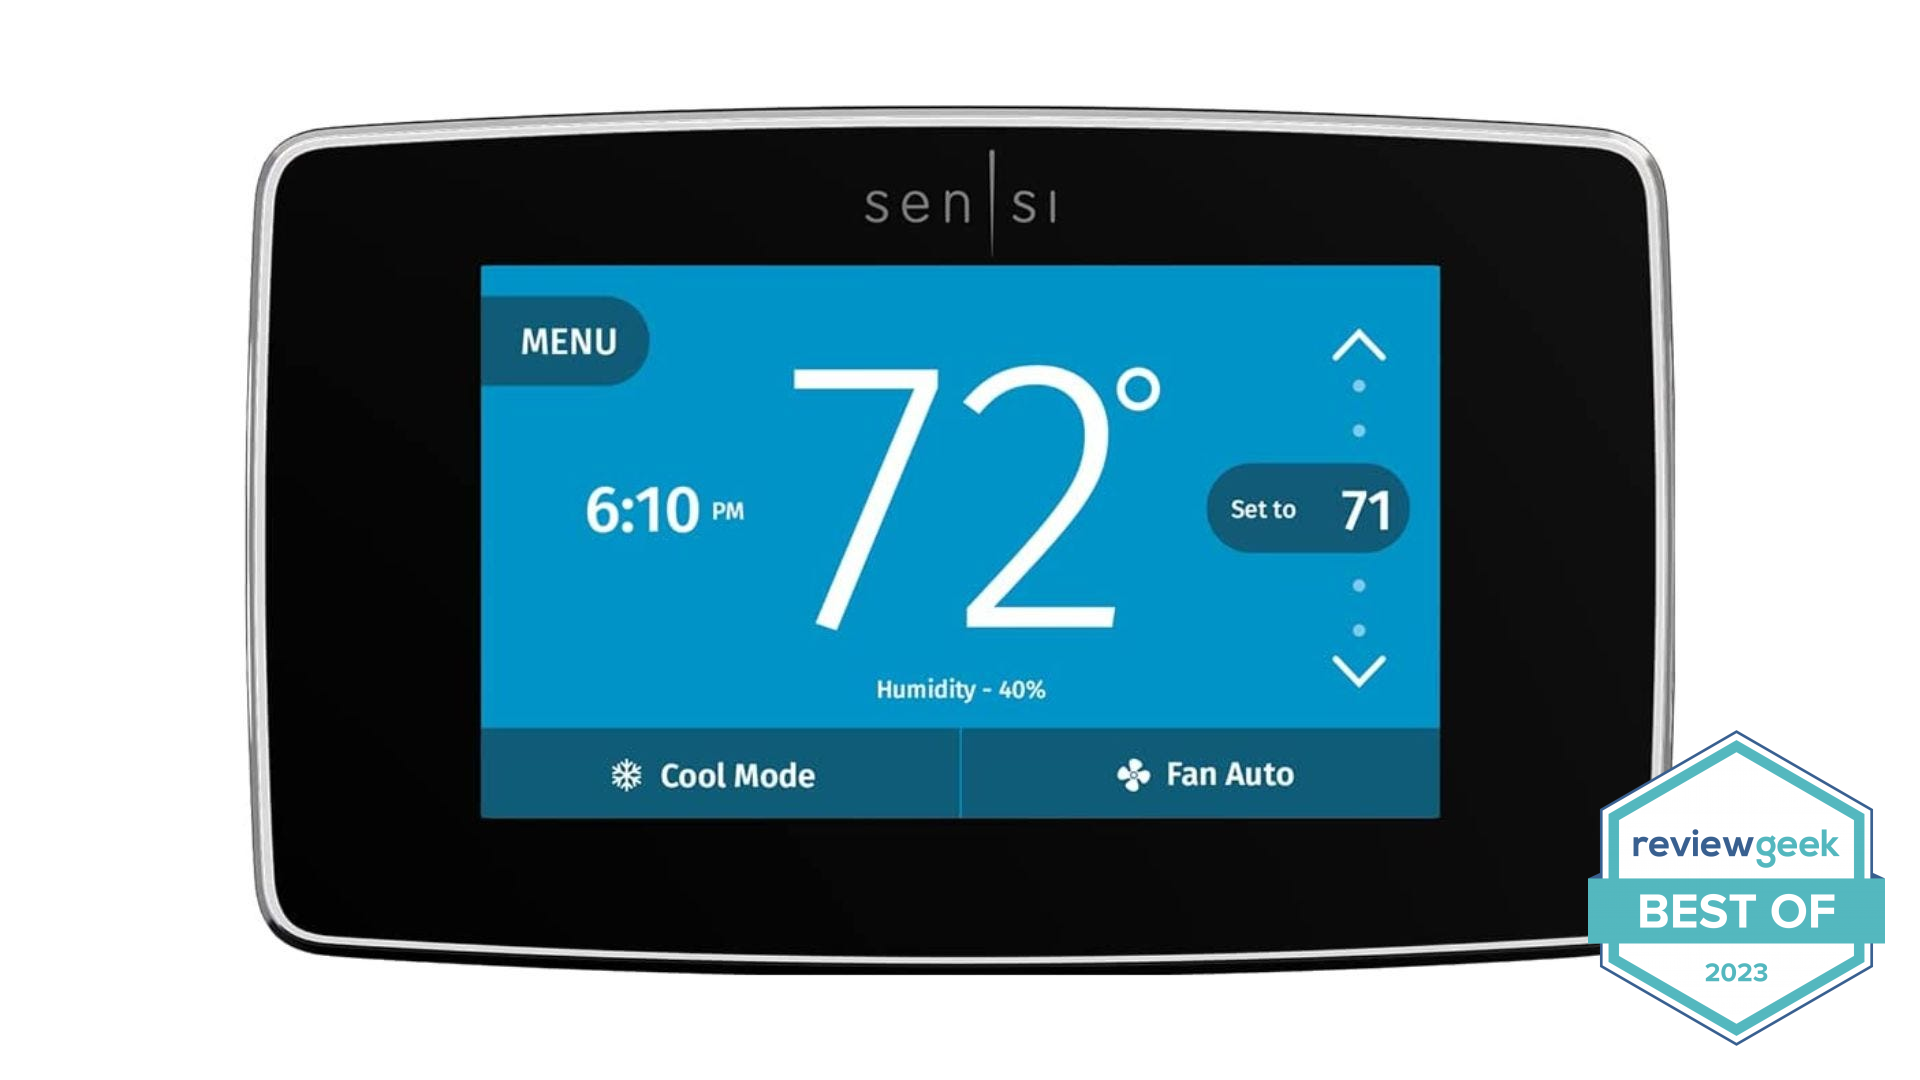 Emerson Sensi Touch Smart Thermostat for Smart Home